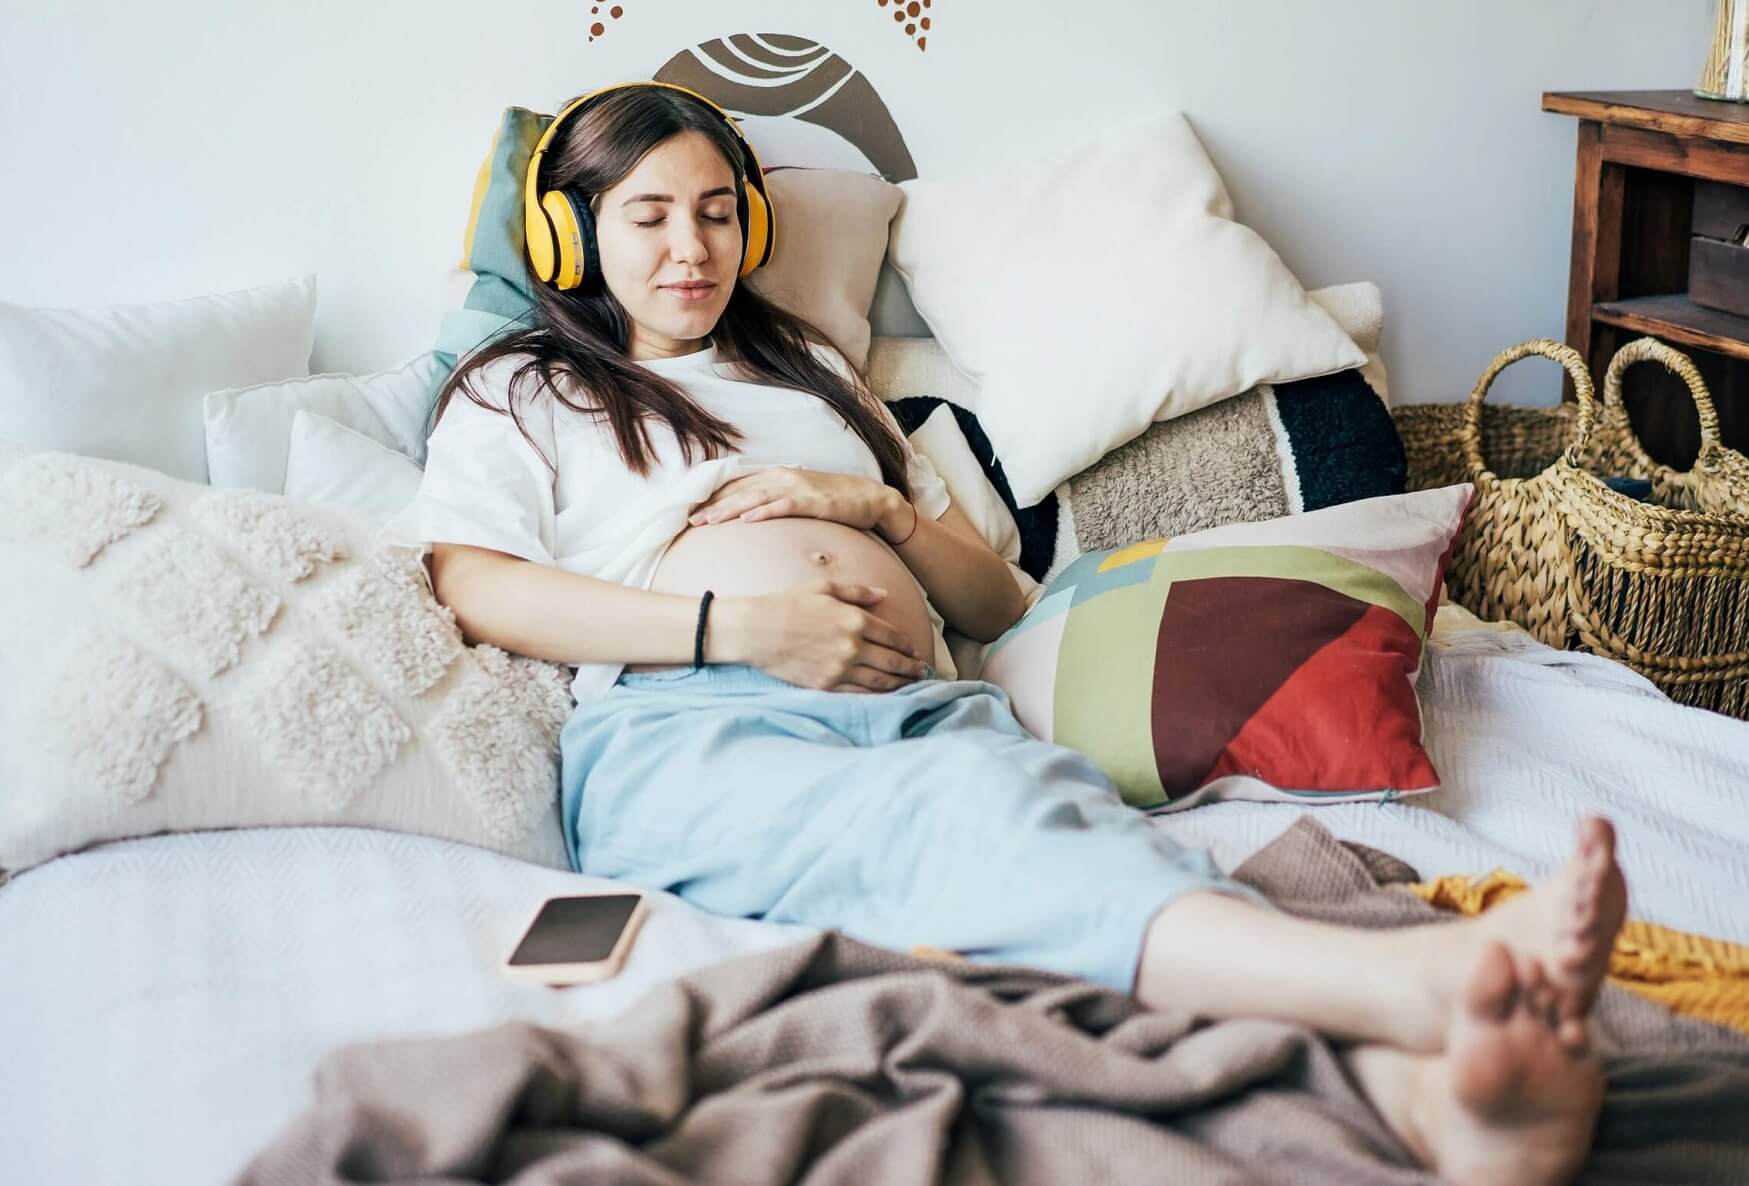 Mindful Pregnancy: 4 Great Relaxing Guided Meditations for Pregnant Women